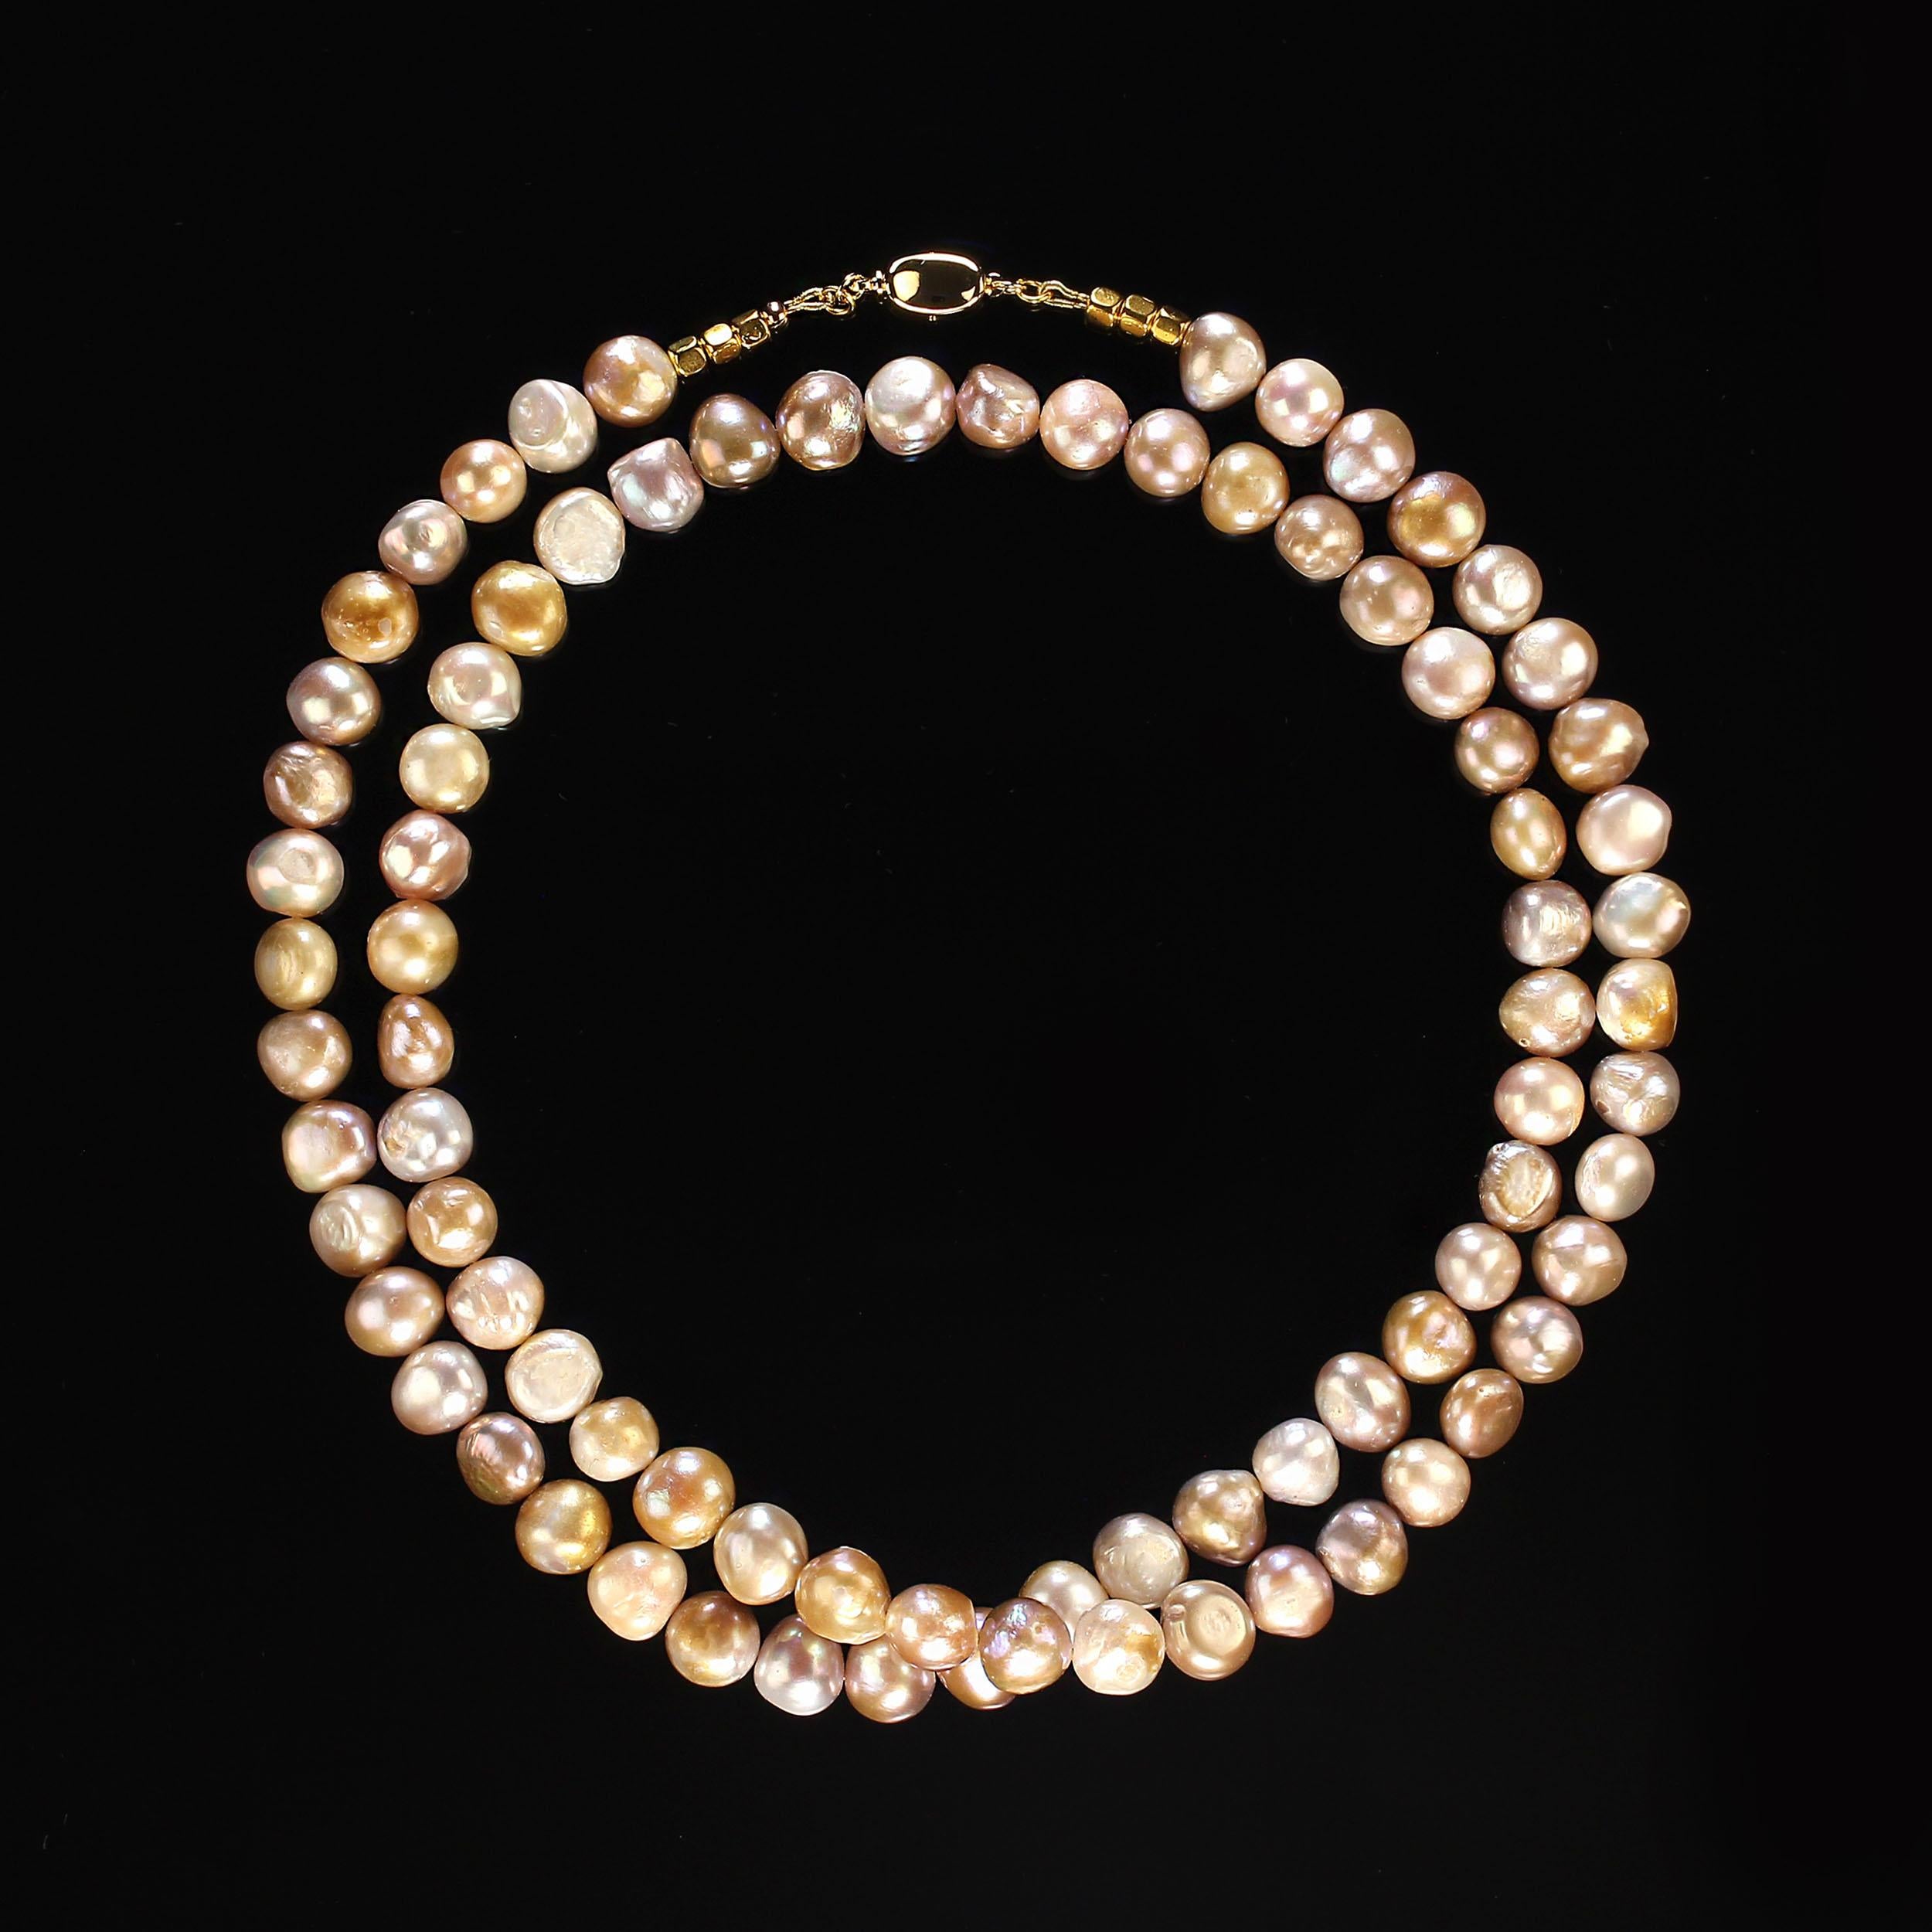 Artisan AJD 32 Inch Gorgeous Fresh Water Pearl Necklace in Multi Colors